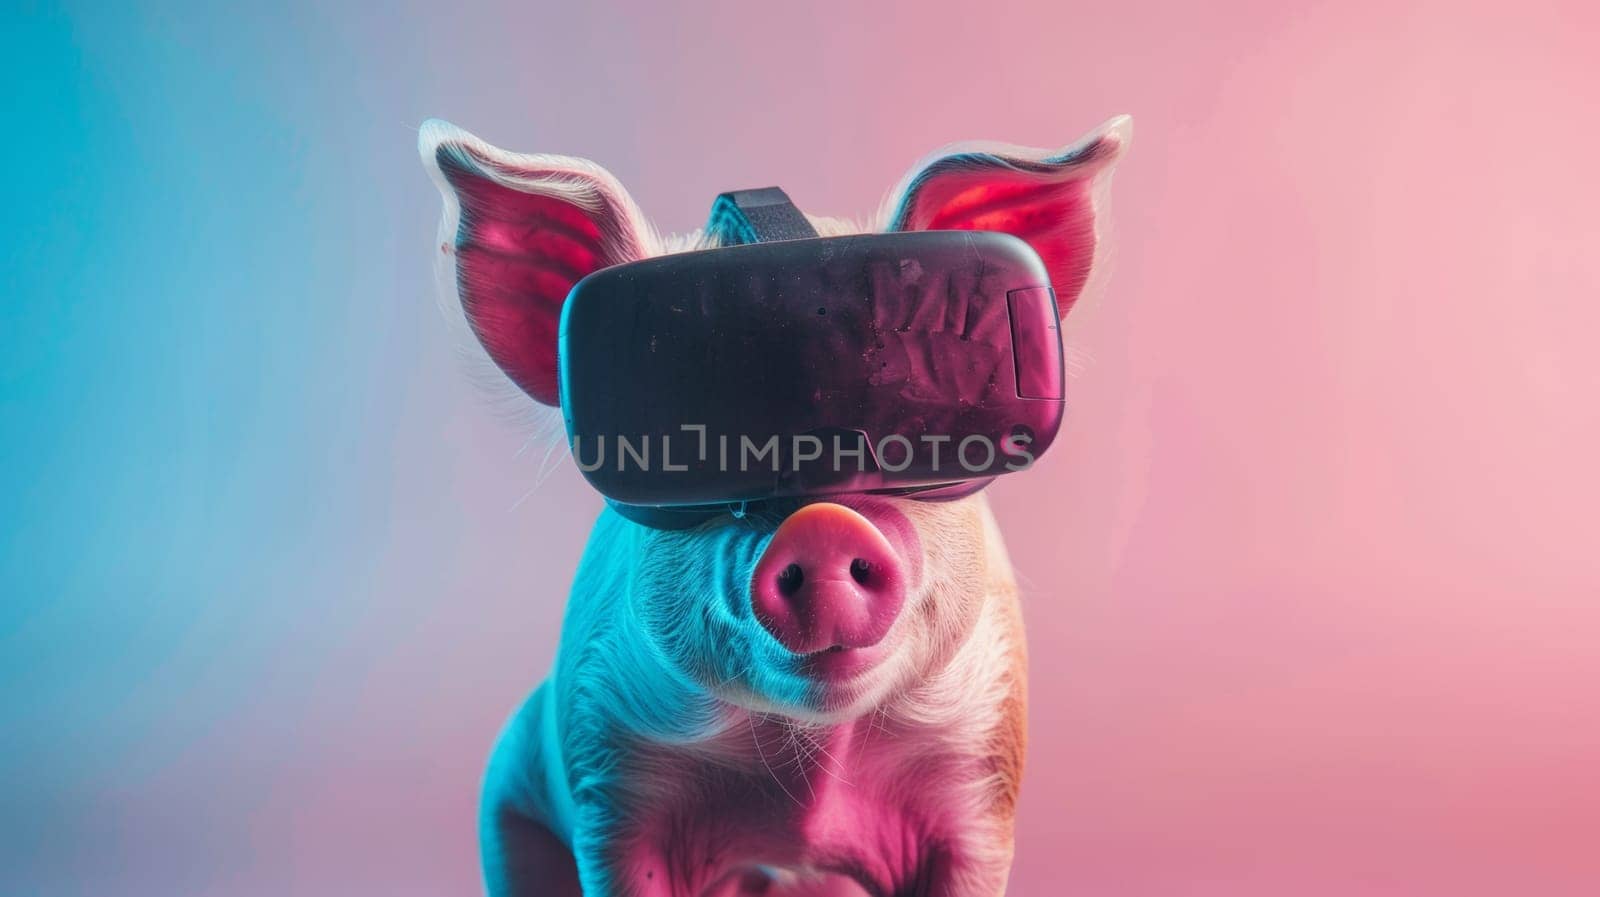 A pig wearing a vr headset on its head